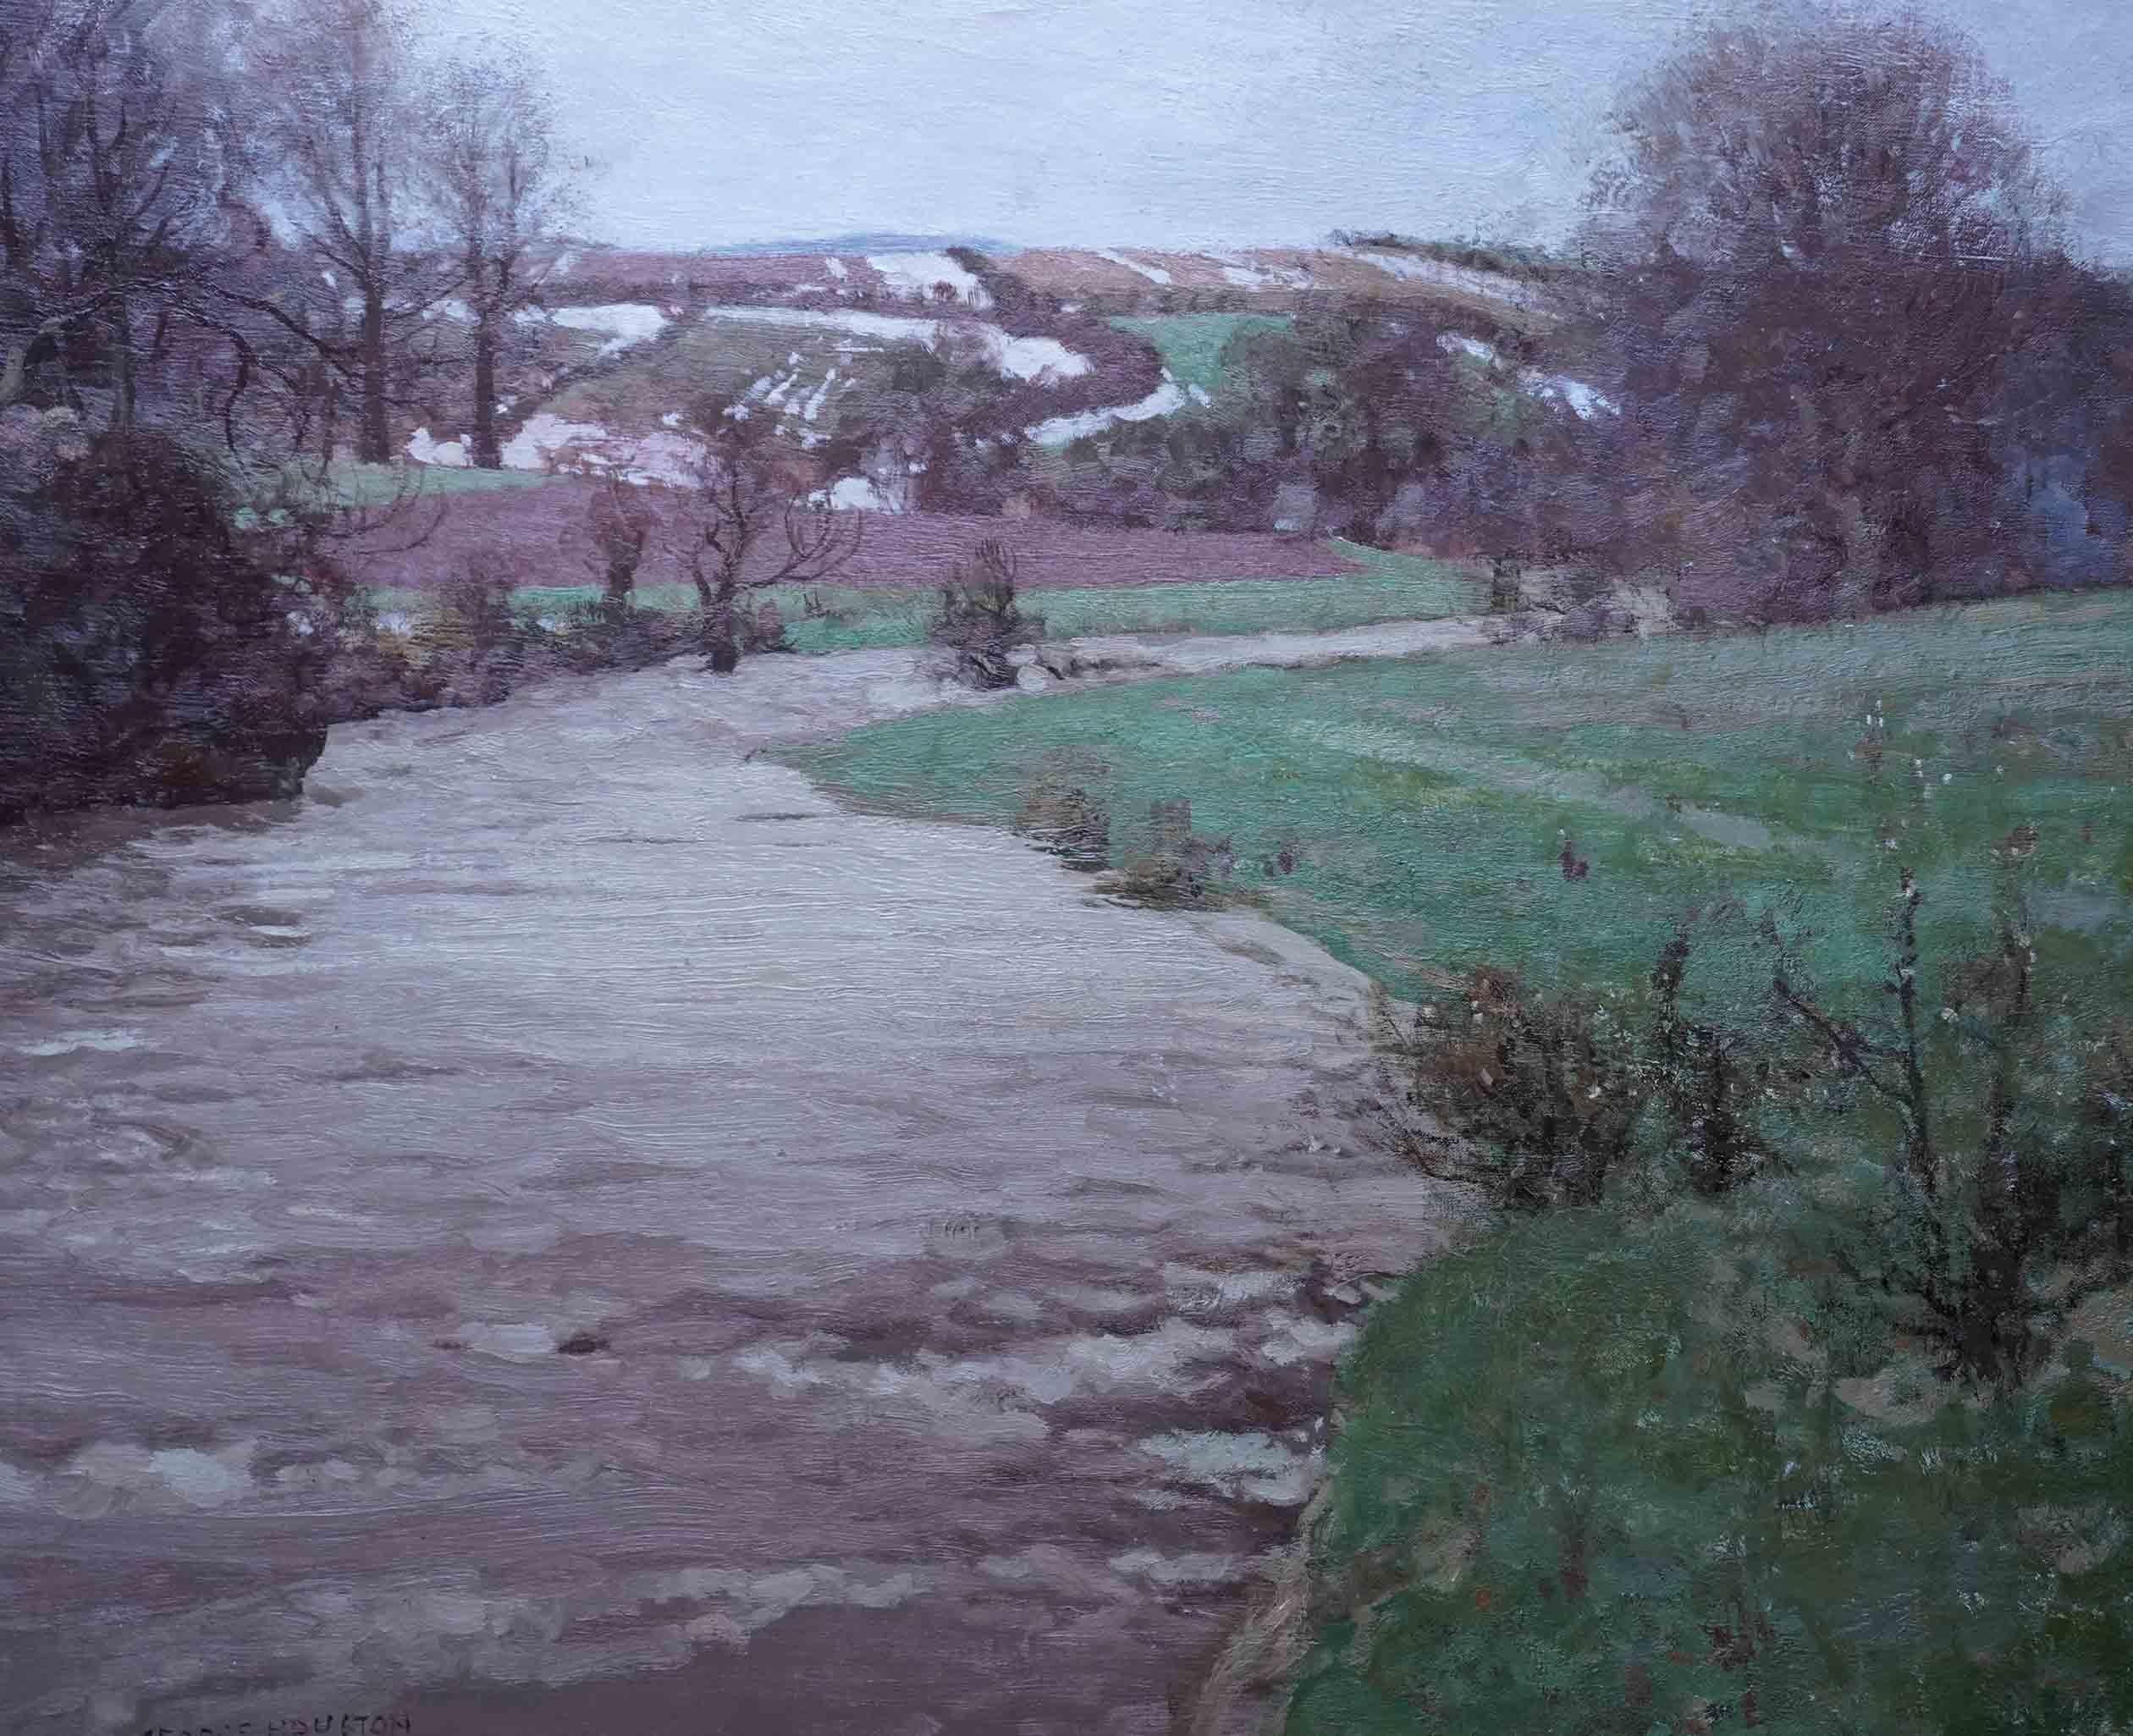 This superb Scottish Impressionist landscape oil painting is by noted artist George Houston. The location is the River Ayr in spring and it was painted circa 1920. The choppy river is in the foreground, looking ready to burst its banks as it flows